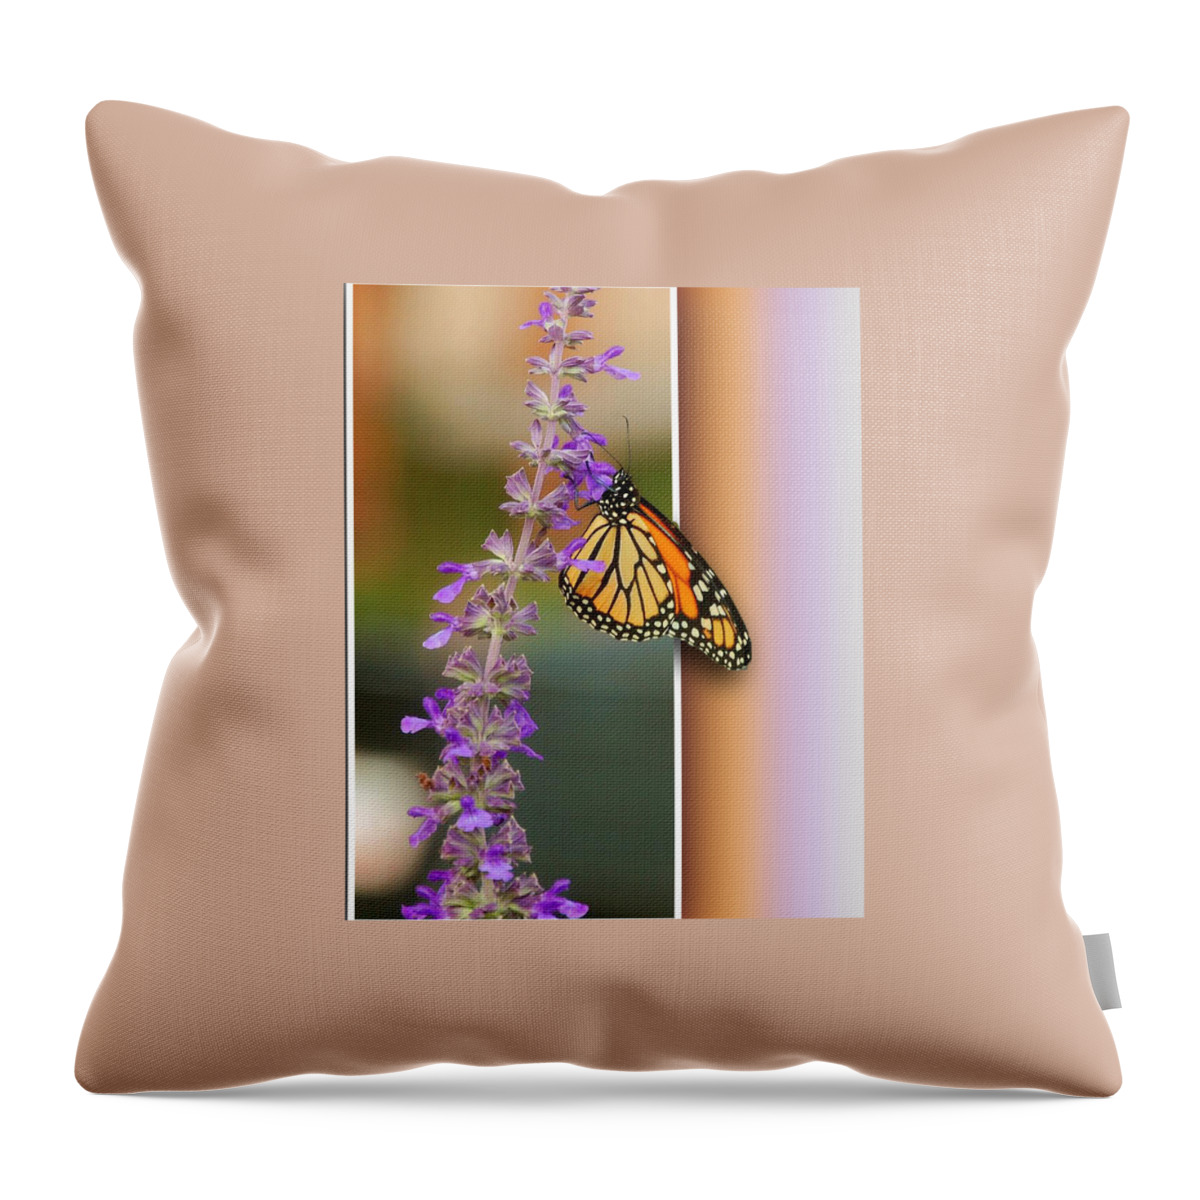 Butterfly Throw Pillow featuring the photograph Blank Greeting Card 3 by Leticia Latocki